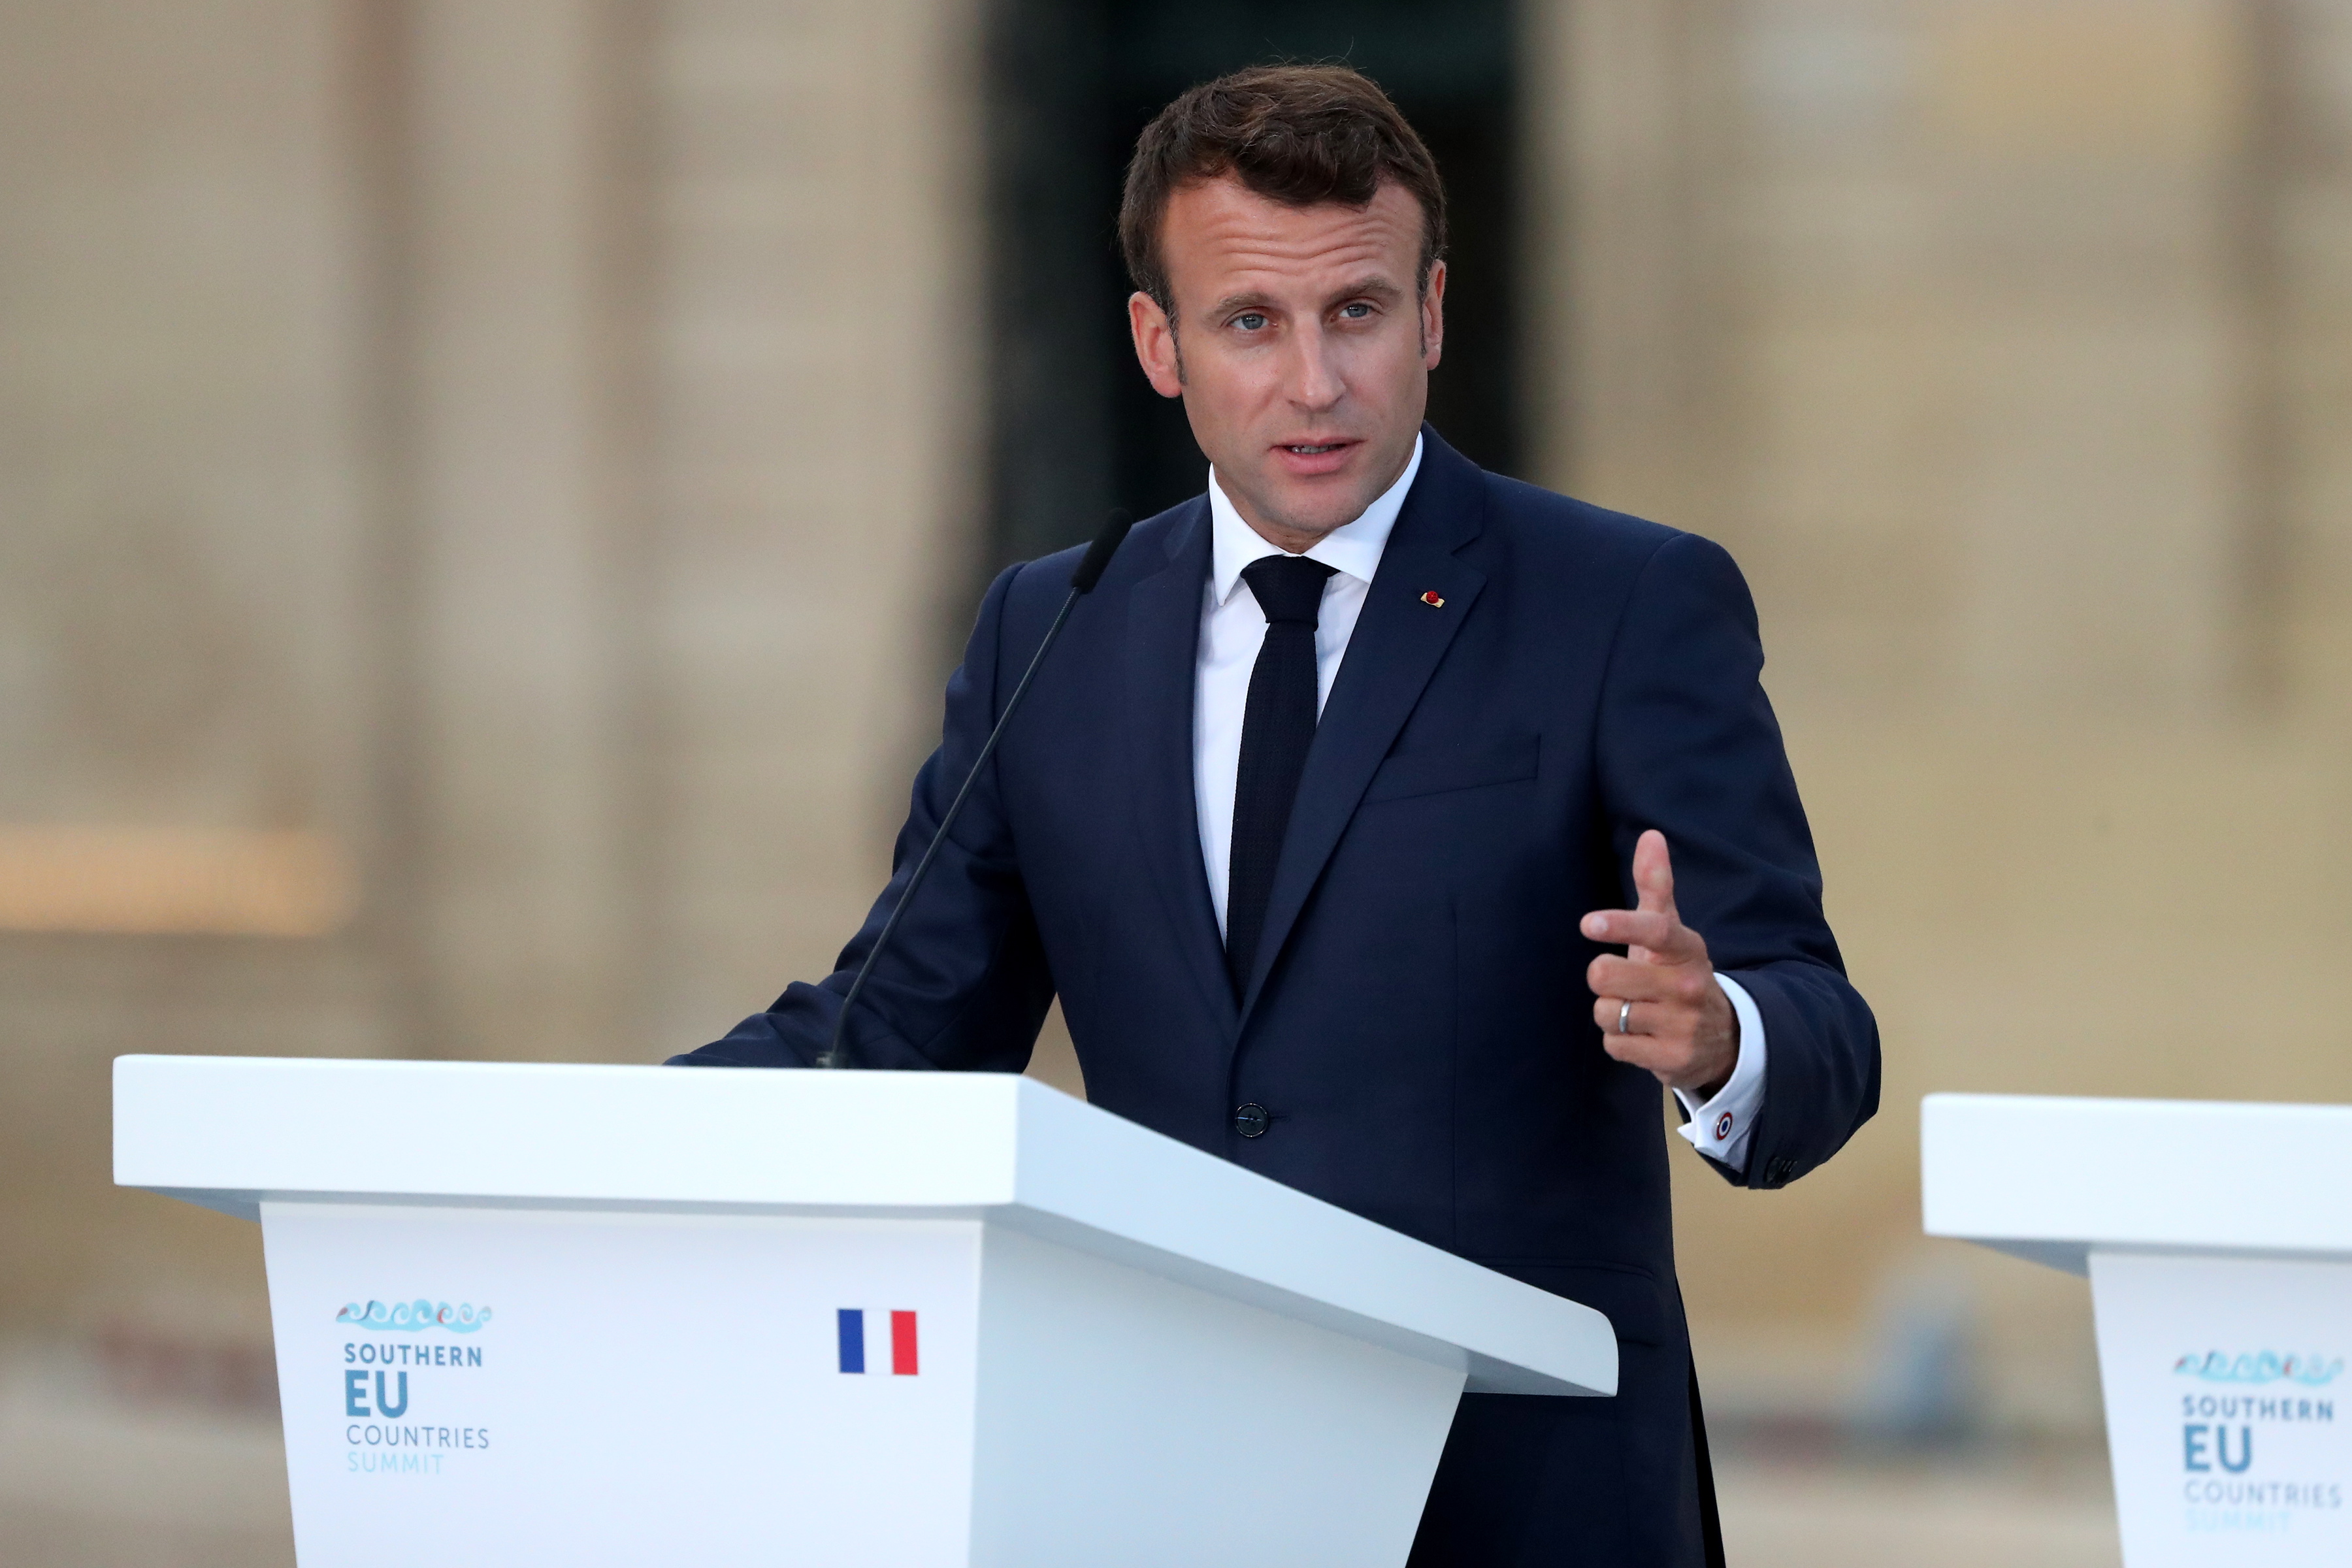 epa07648765 Emmanuel Macron, President of France speaks during the Southern European Countries Summit MED7 (Cyprus, France, Italy, Greece, Portugal, Malta and Spain) press conference at the  Auberge de Castille in Valletta, Malta, 14 June 2019.  EPA/DOMENIC AQUILINA